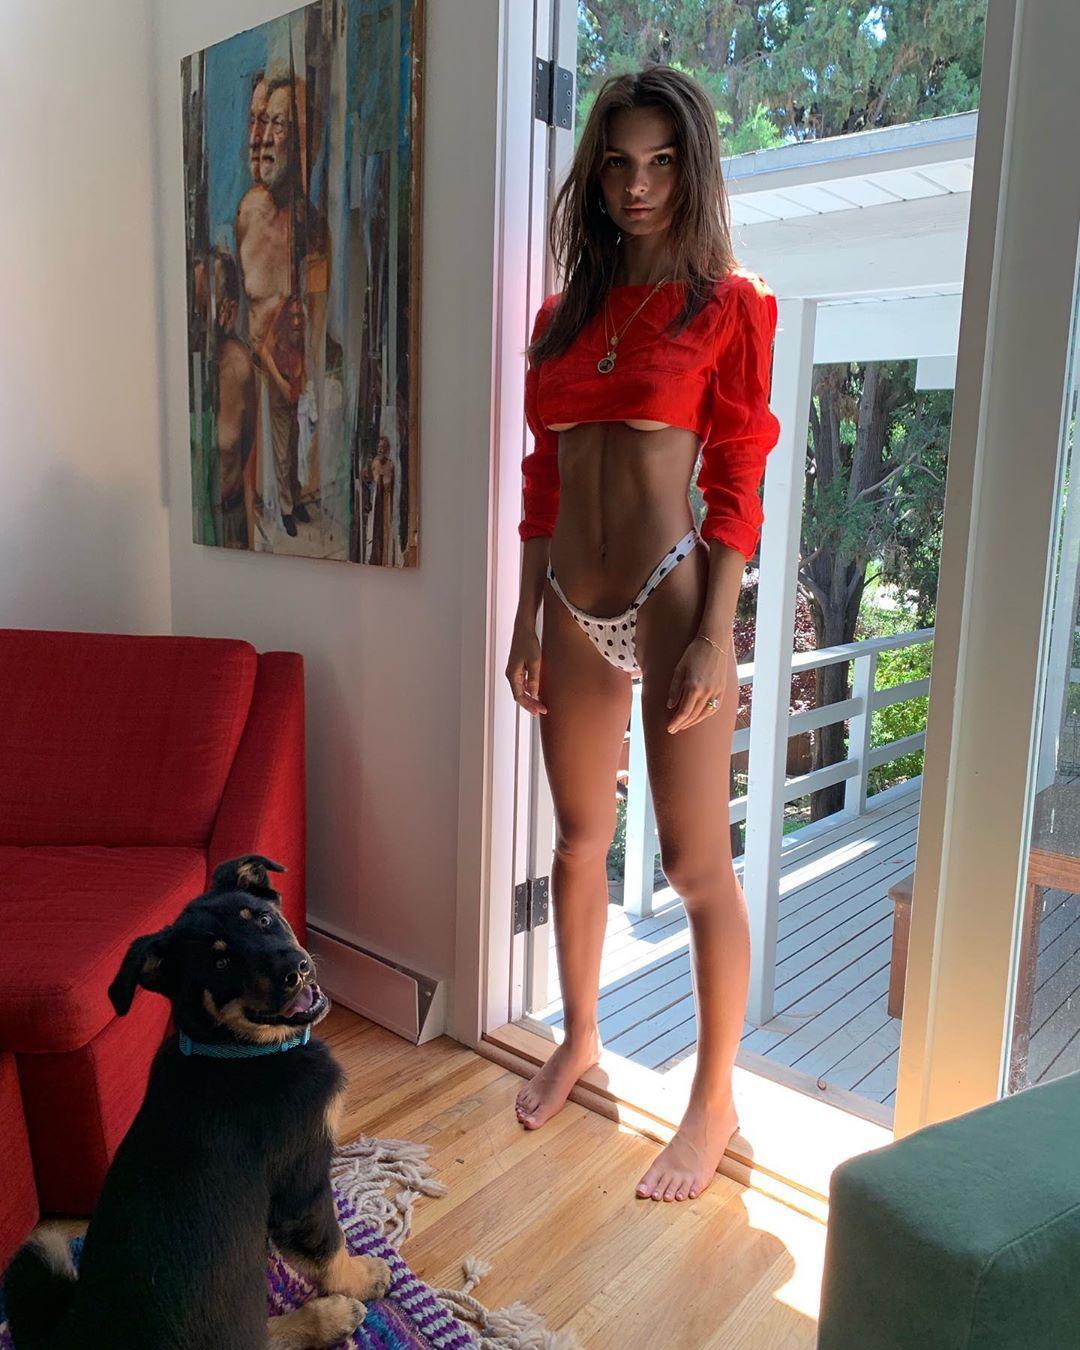 71 Hot Pictures Of Emily Ratajkowski Explore Her Extremely Sexy Body | Best Of Comic Books